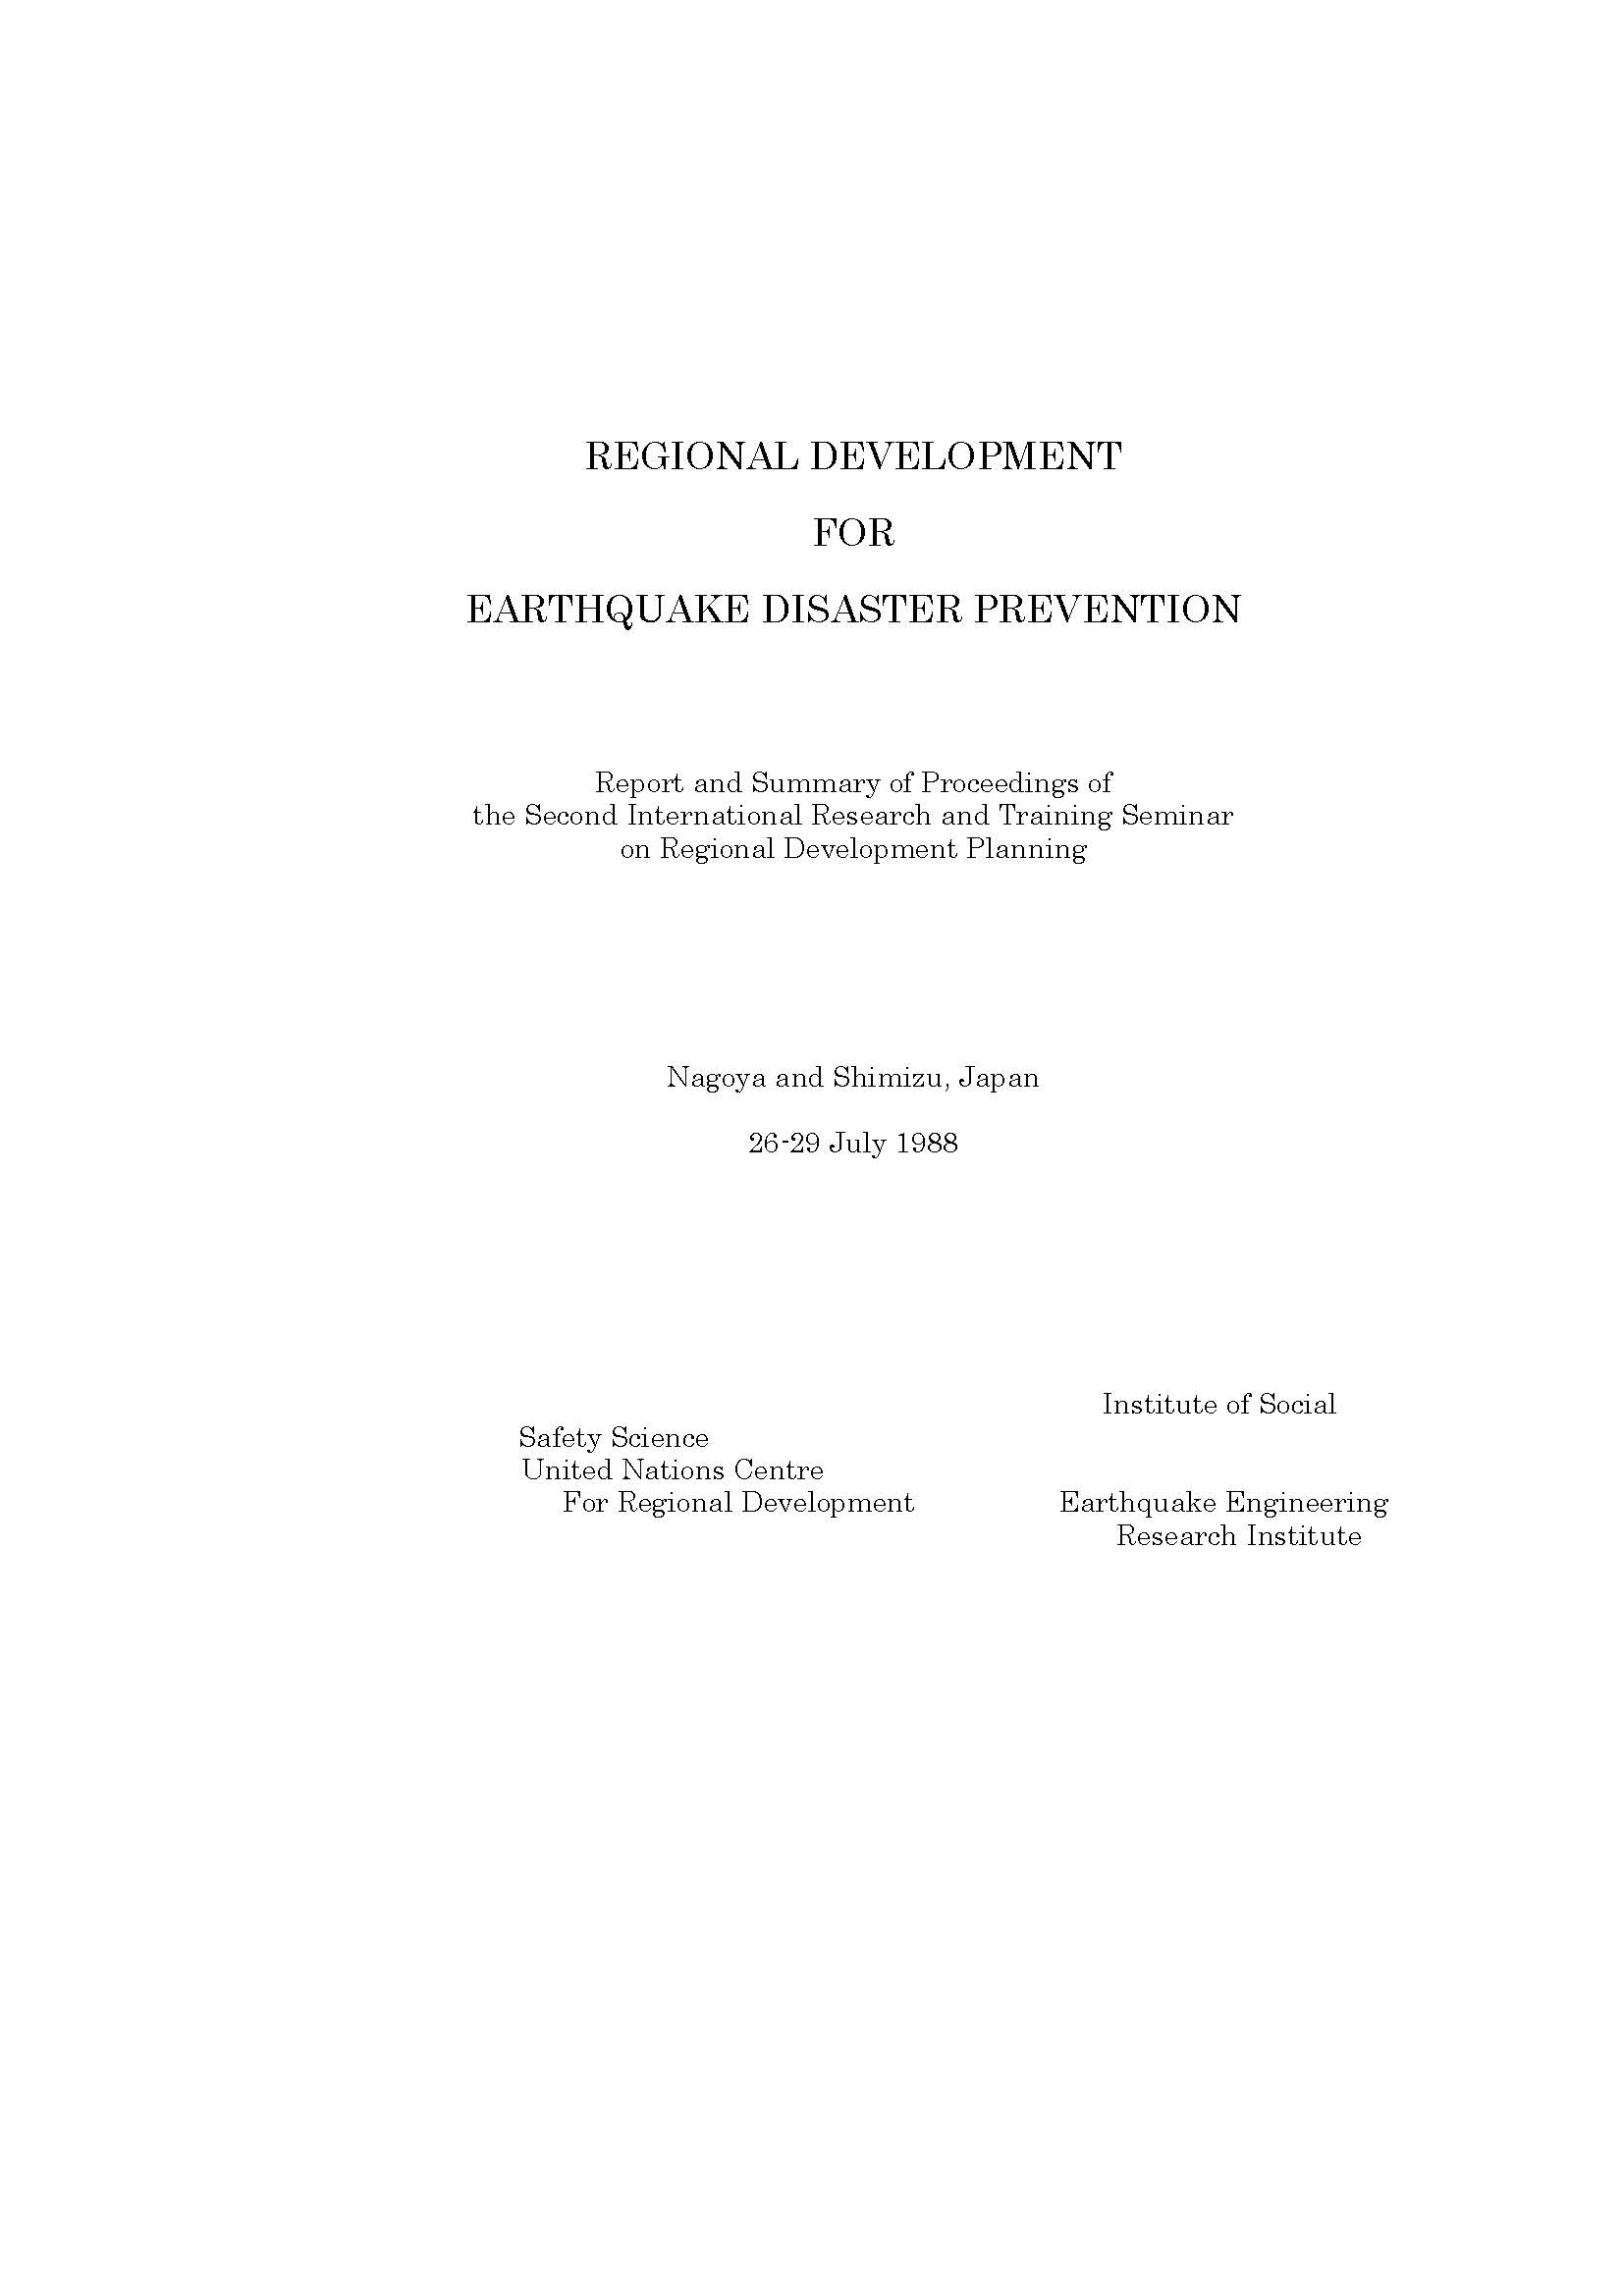 Cover of Report and Summary of Proceedings of the Second International Research and Training Seminar